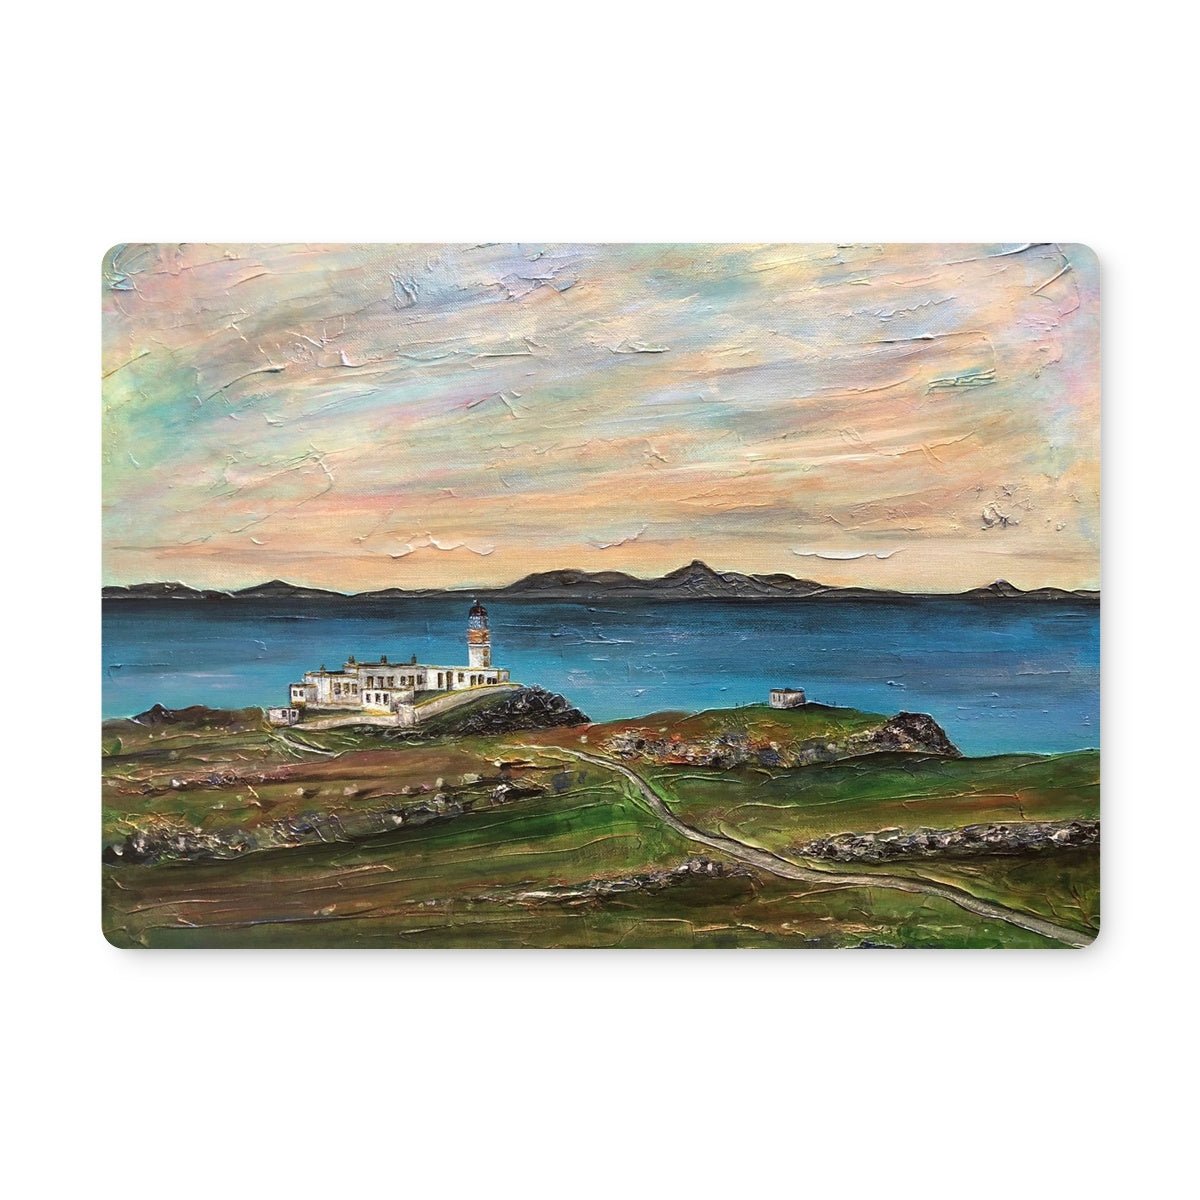 Neist Point Skye Art Gifts Placemat-Placemats-Skye Art Gallery-2 Placemats-Paintings, Prints, Homeware, Art Gifts From Scotland By Scottish Artist Kevin Hunter